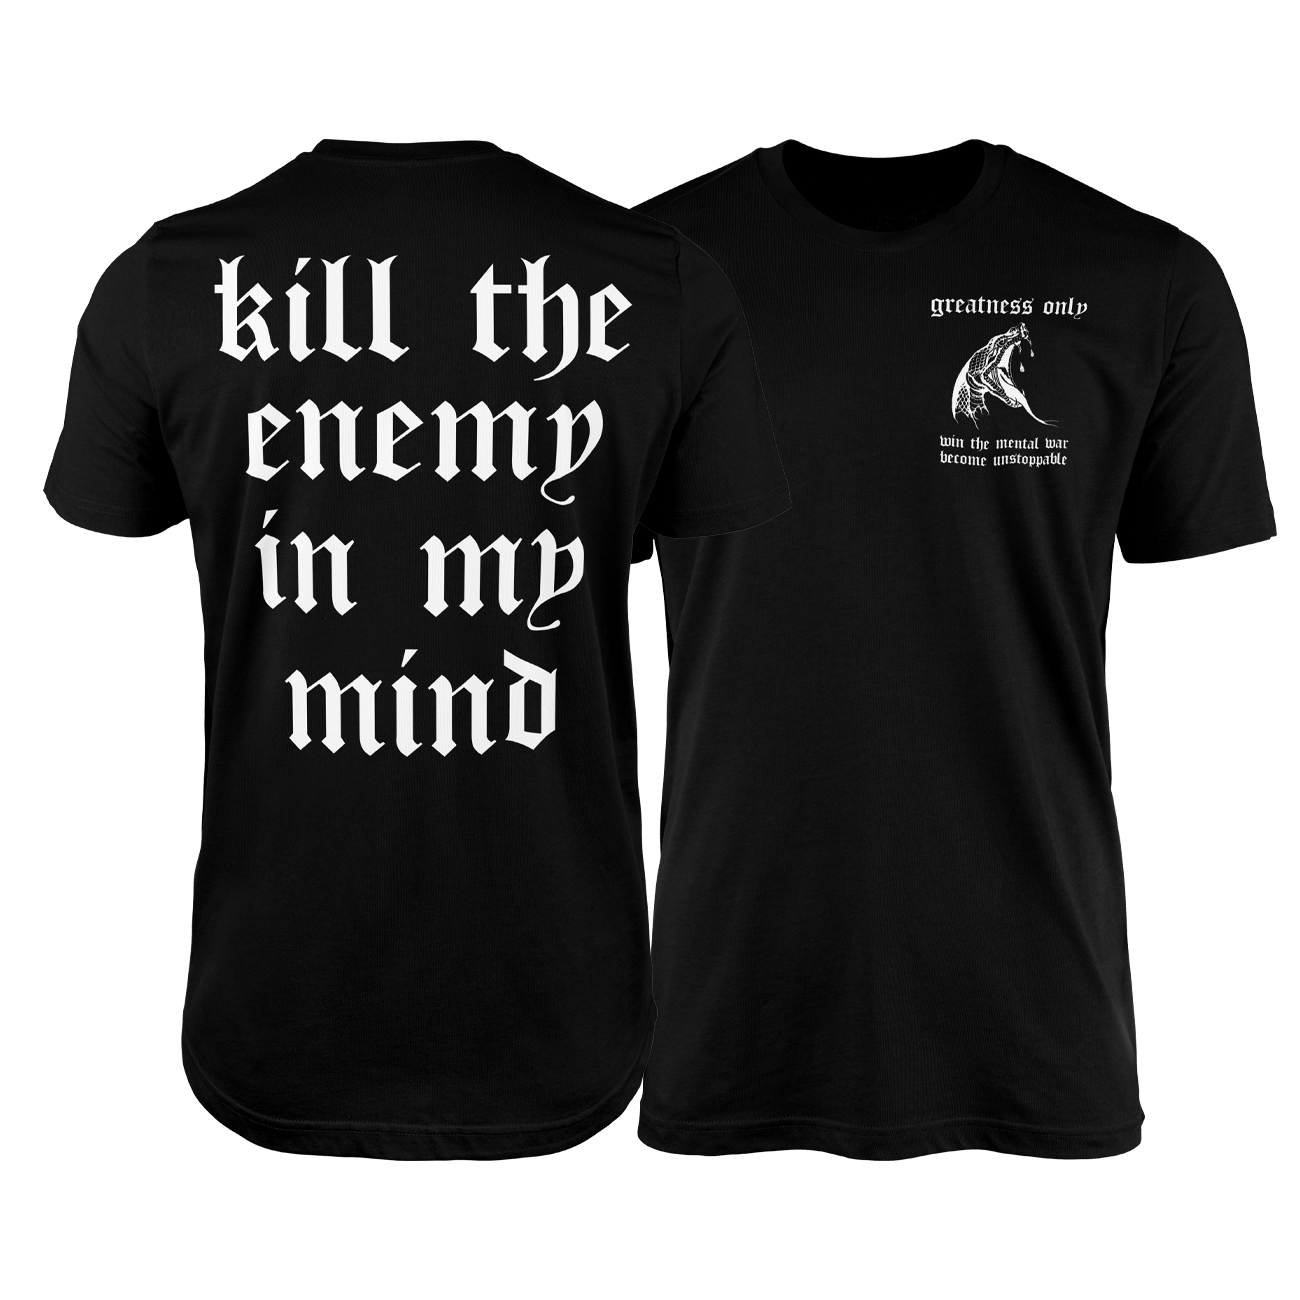 KILL THE ENEMY IN MY MIND